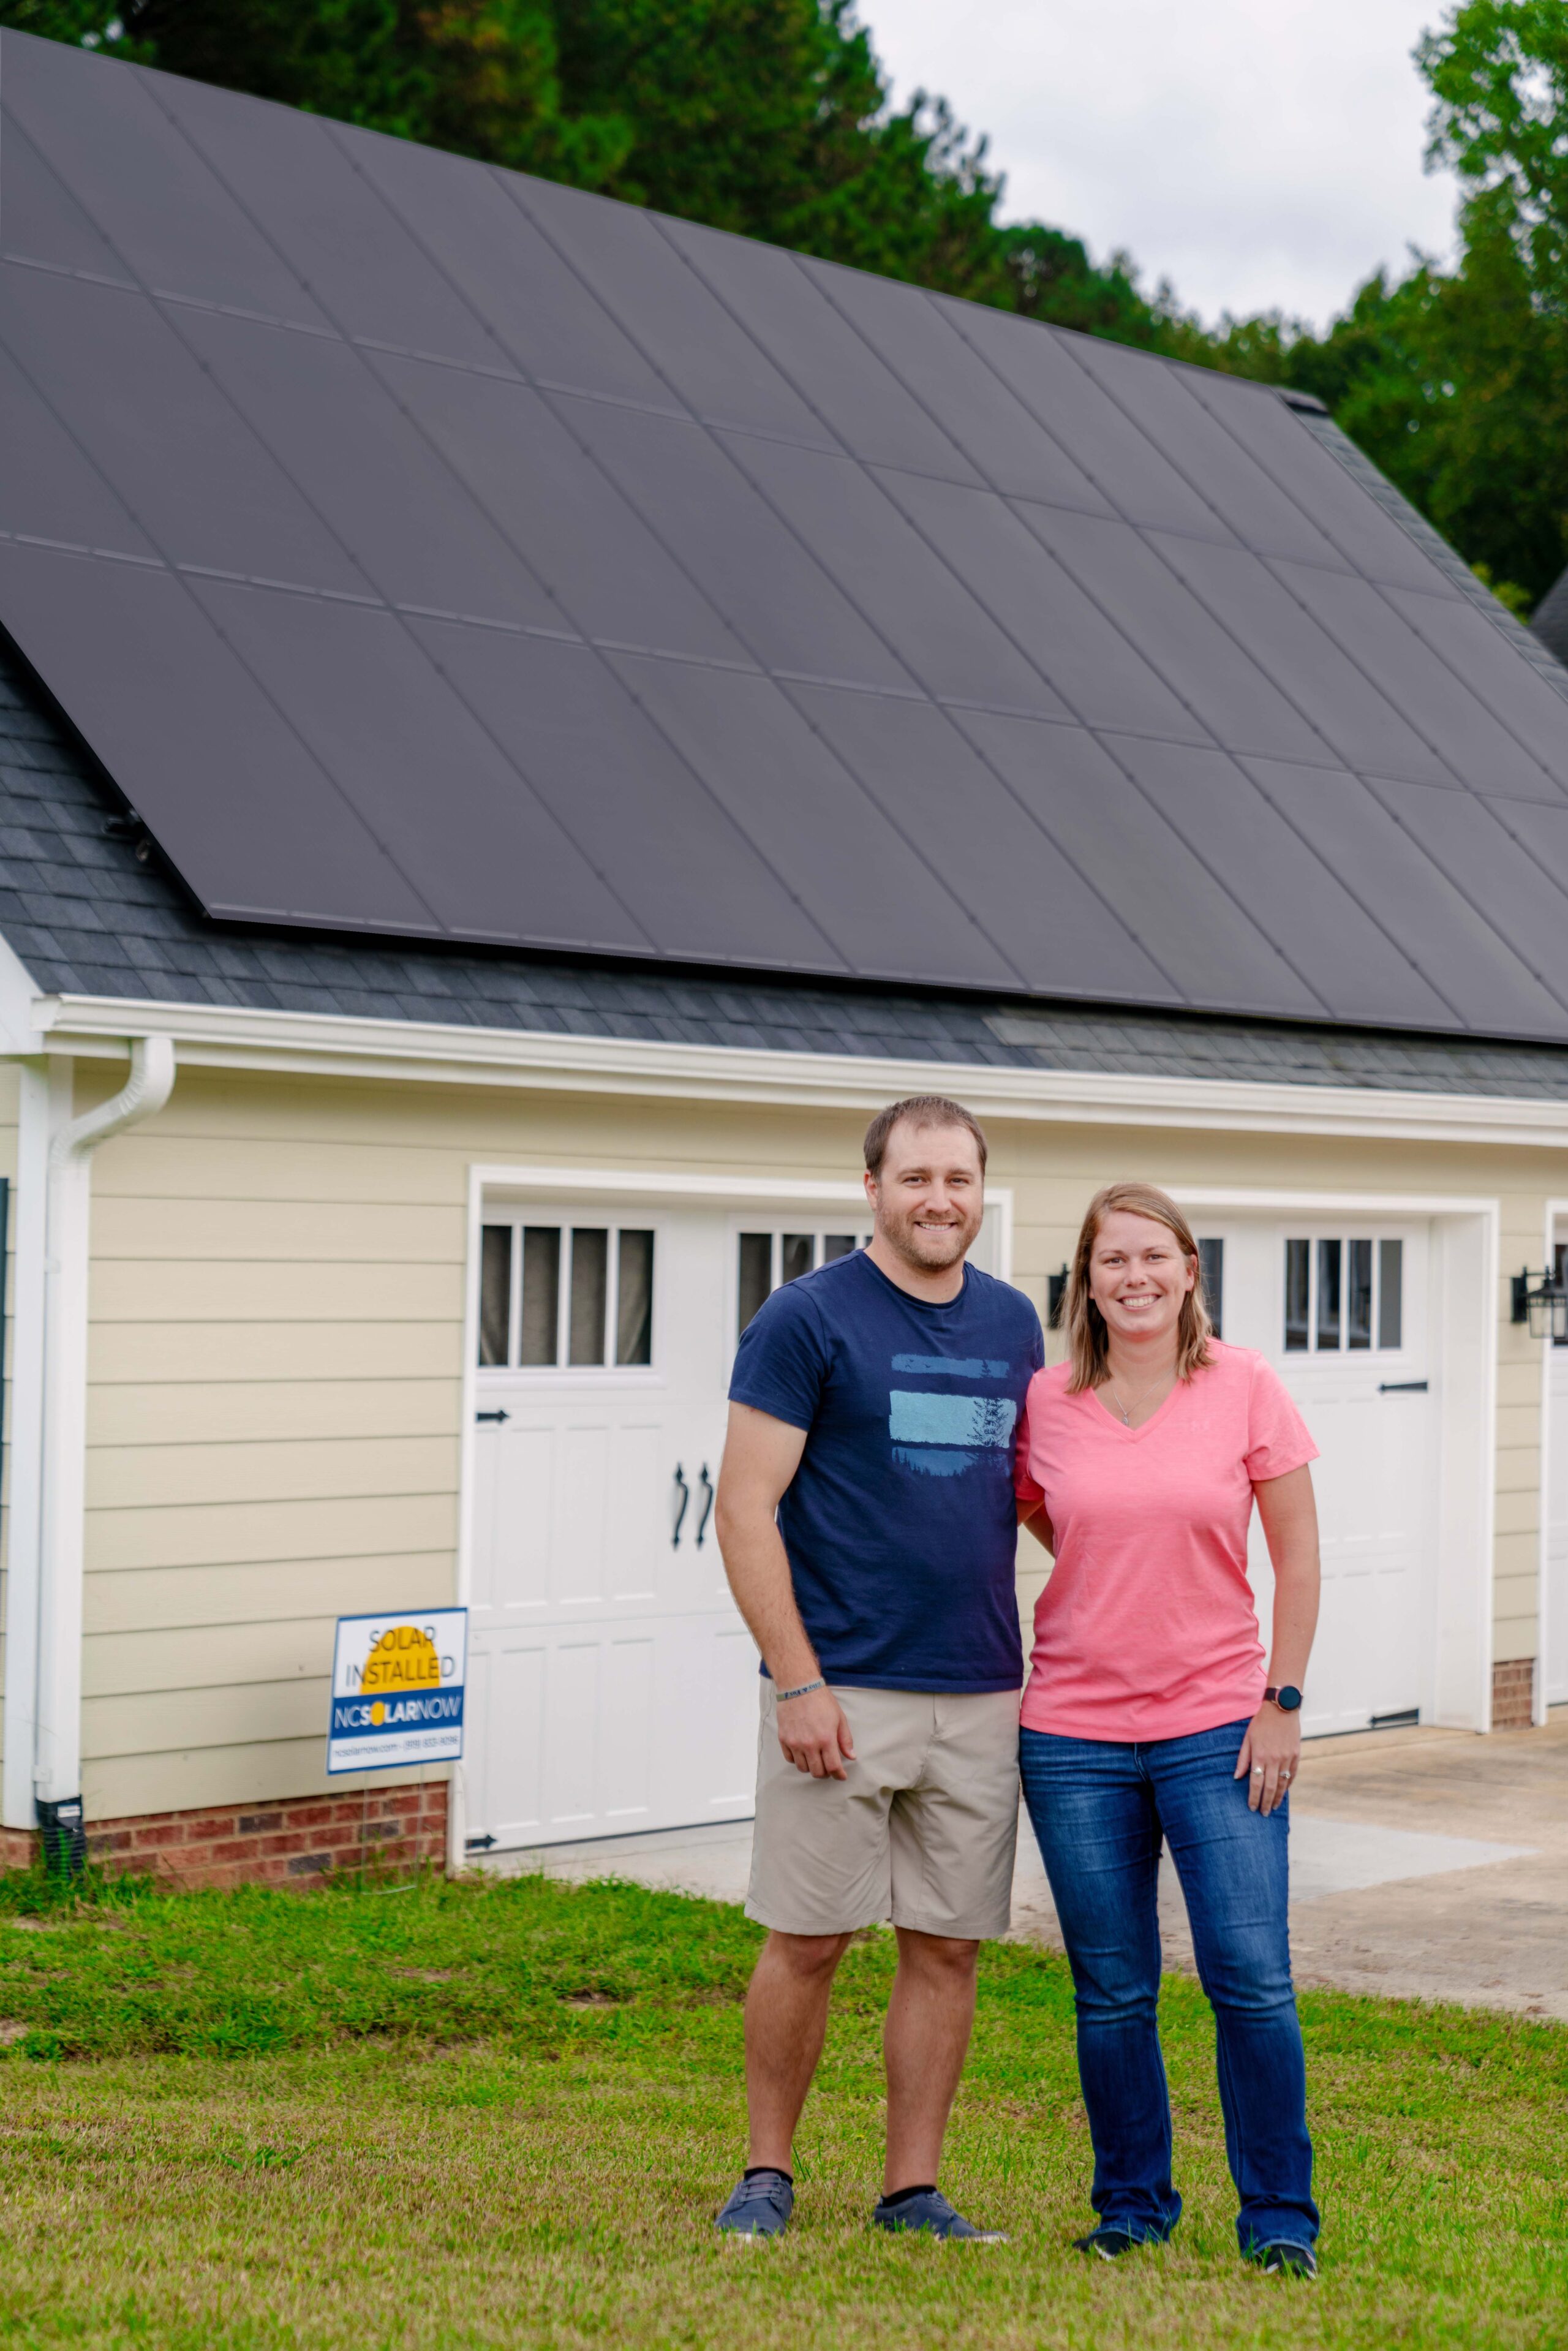 Justin Fox and wife in front of solar panels